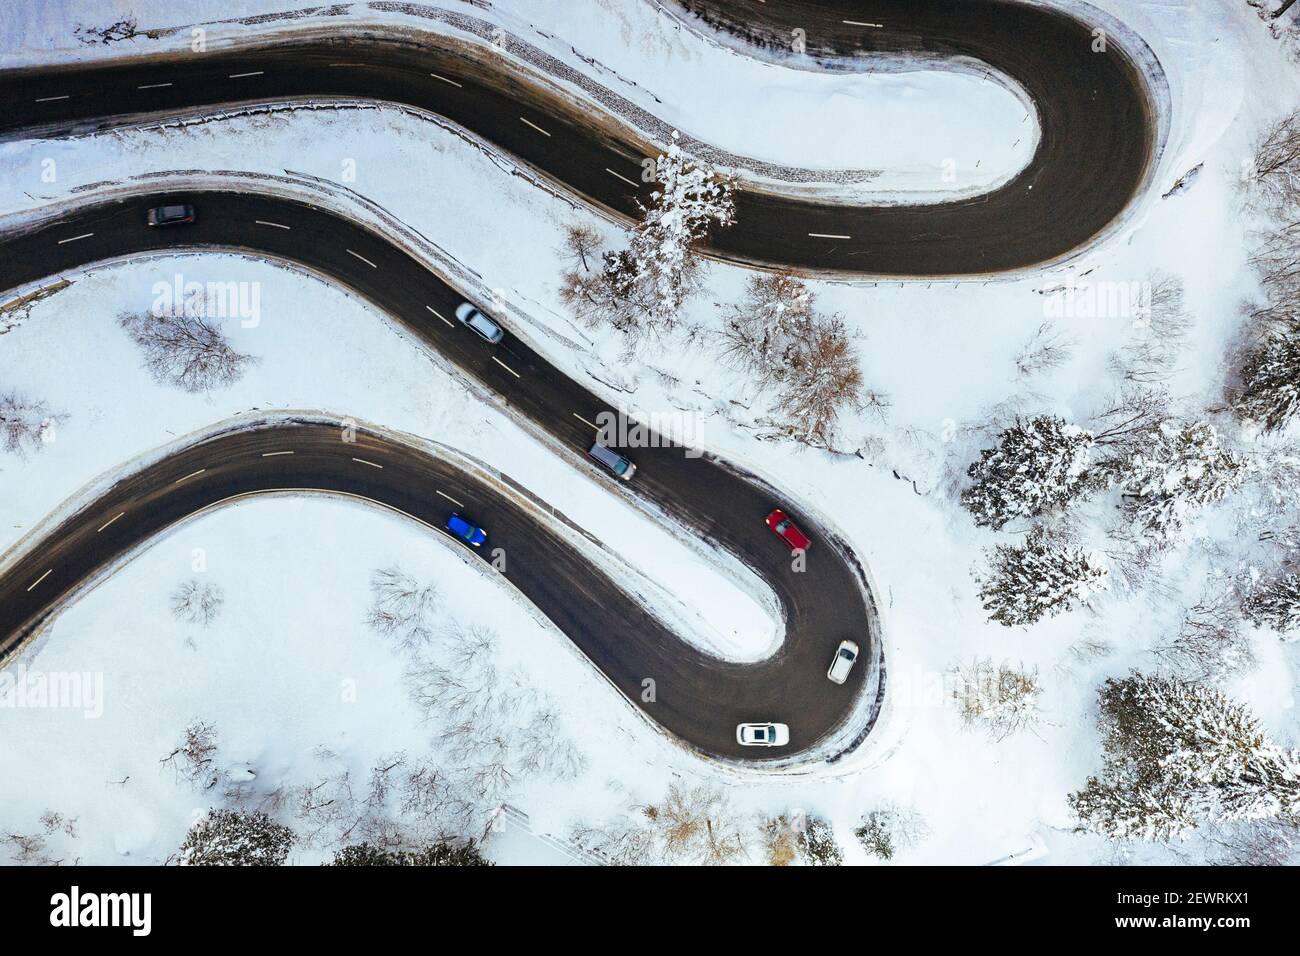 Aerial view of cars driving on bends of snowy mountain road in winter, Switzerland, Europe Stock Photo